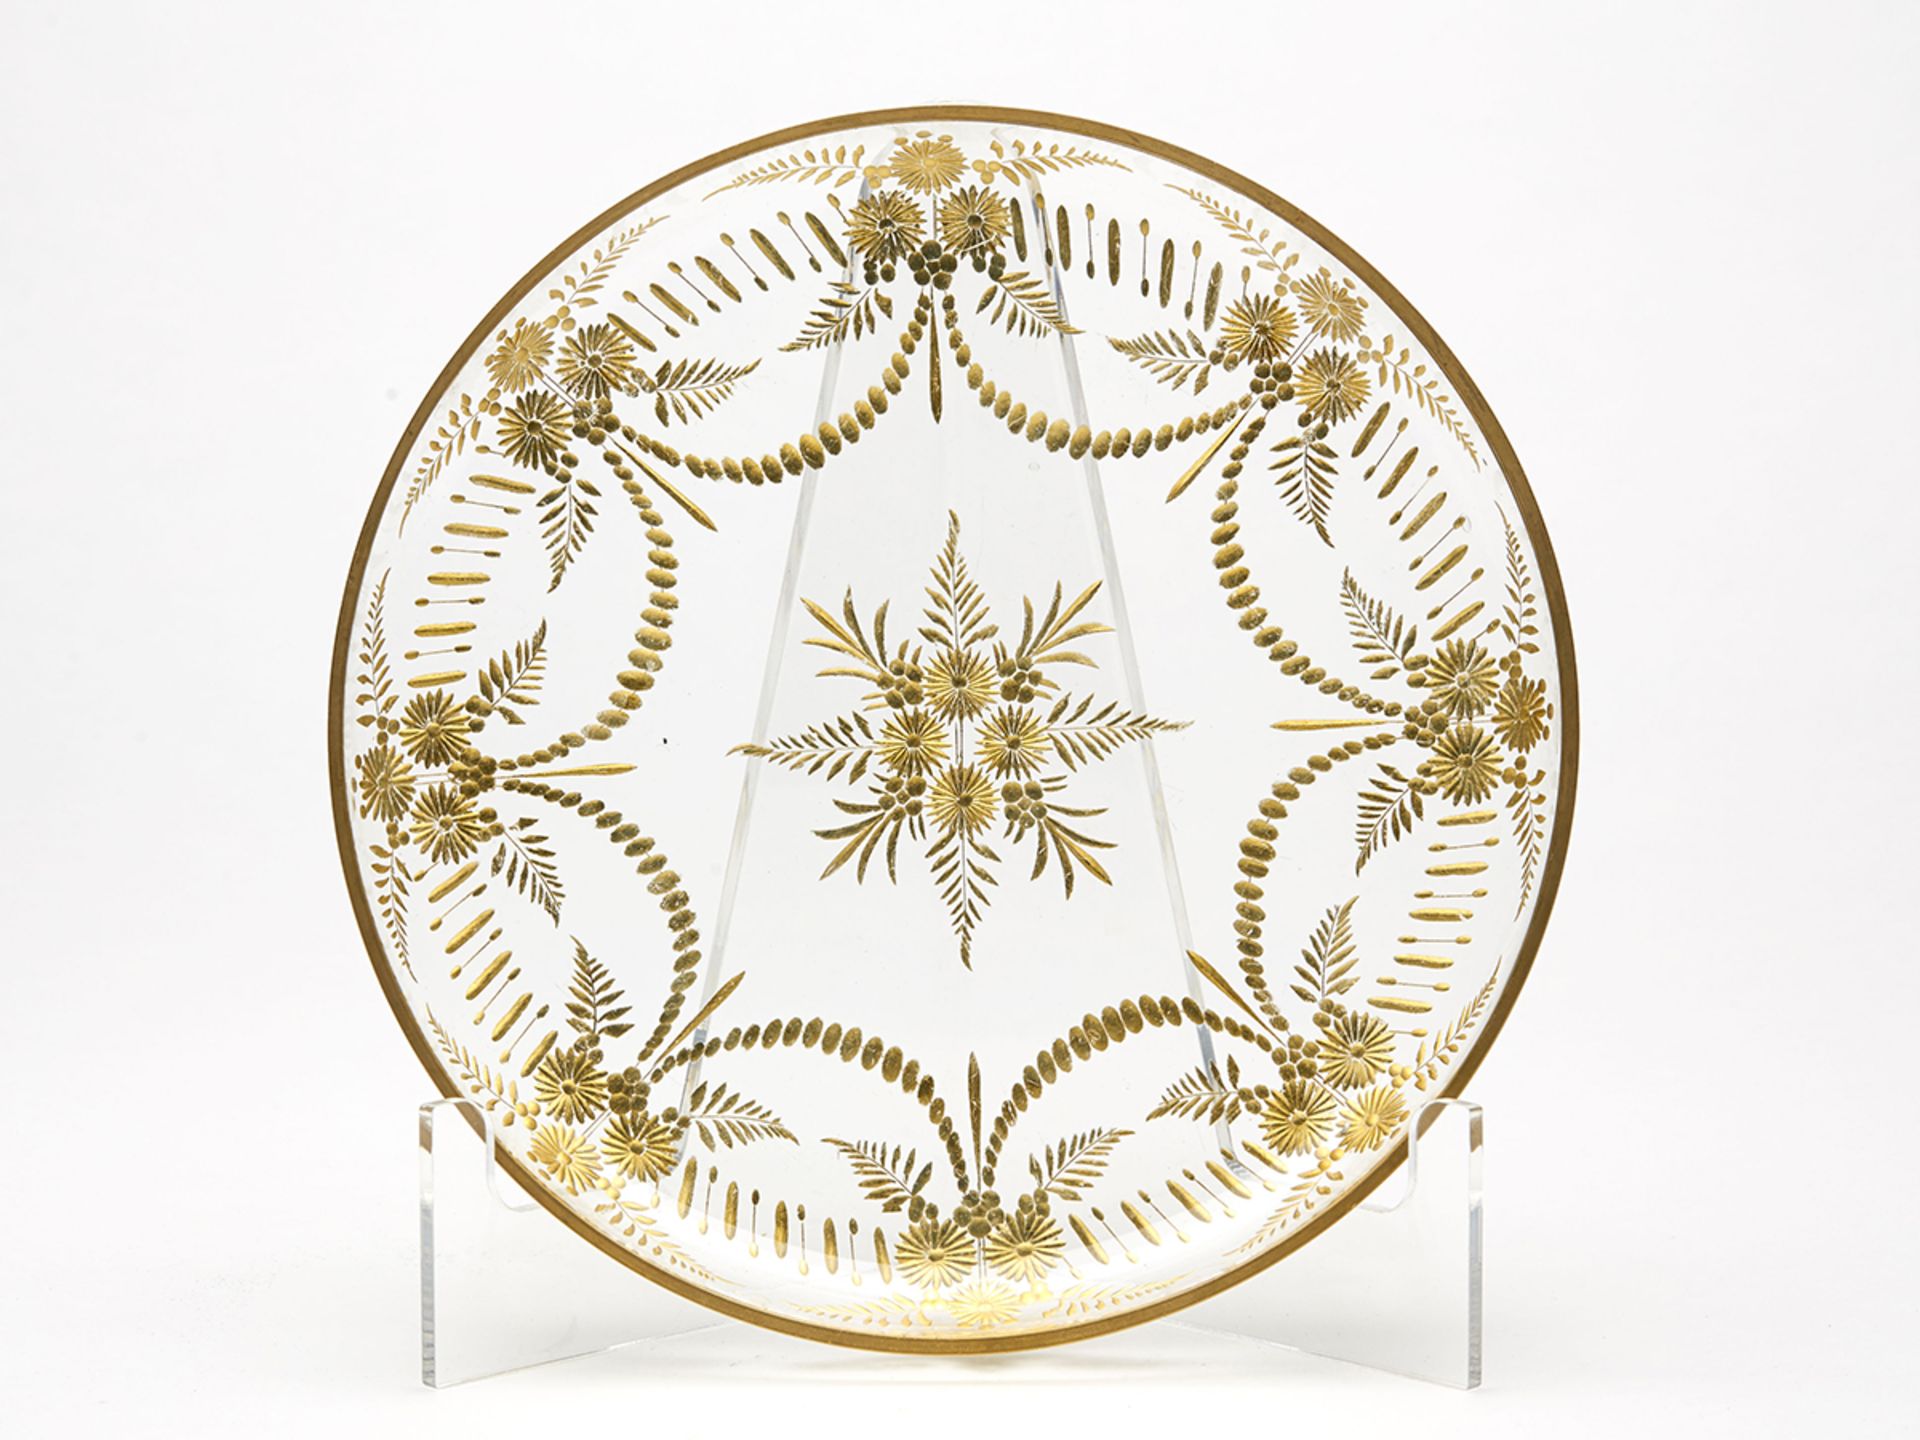 Stunning Antique Engraved And Gilded Glass Tray 19Th C.